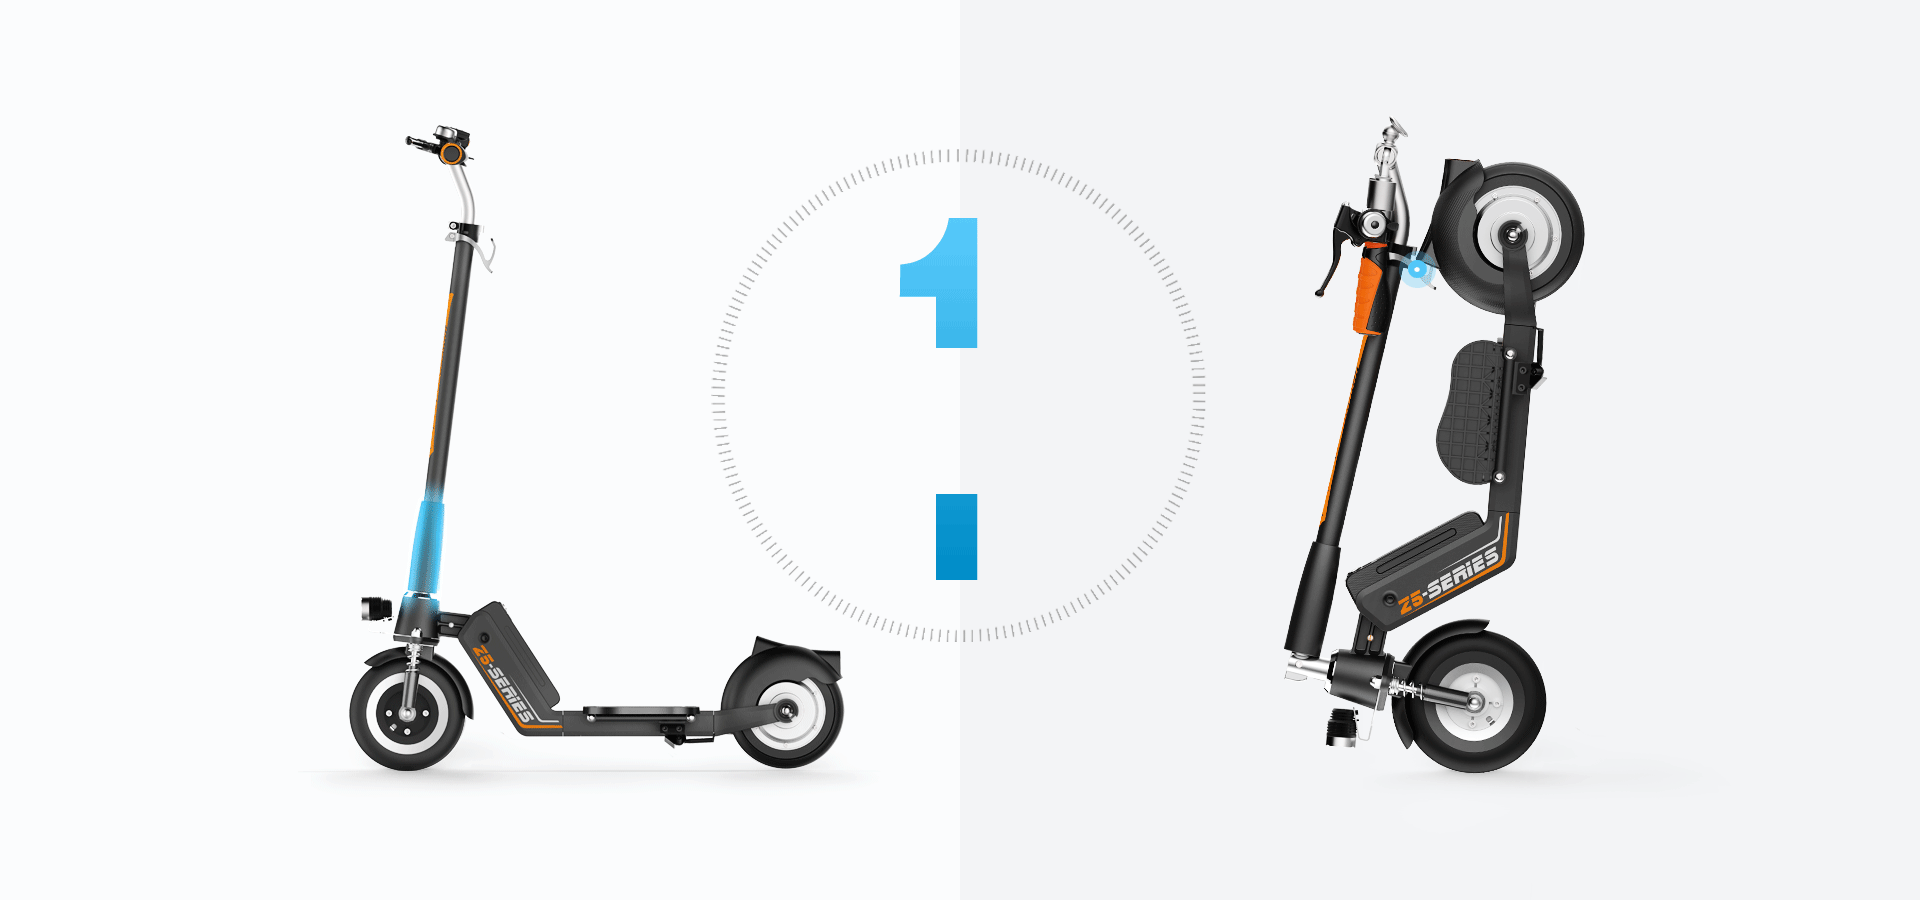 Airwheel Z5 eco-friendly electric scooter